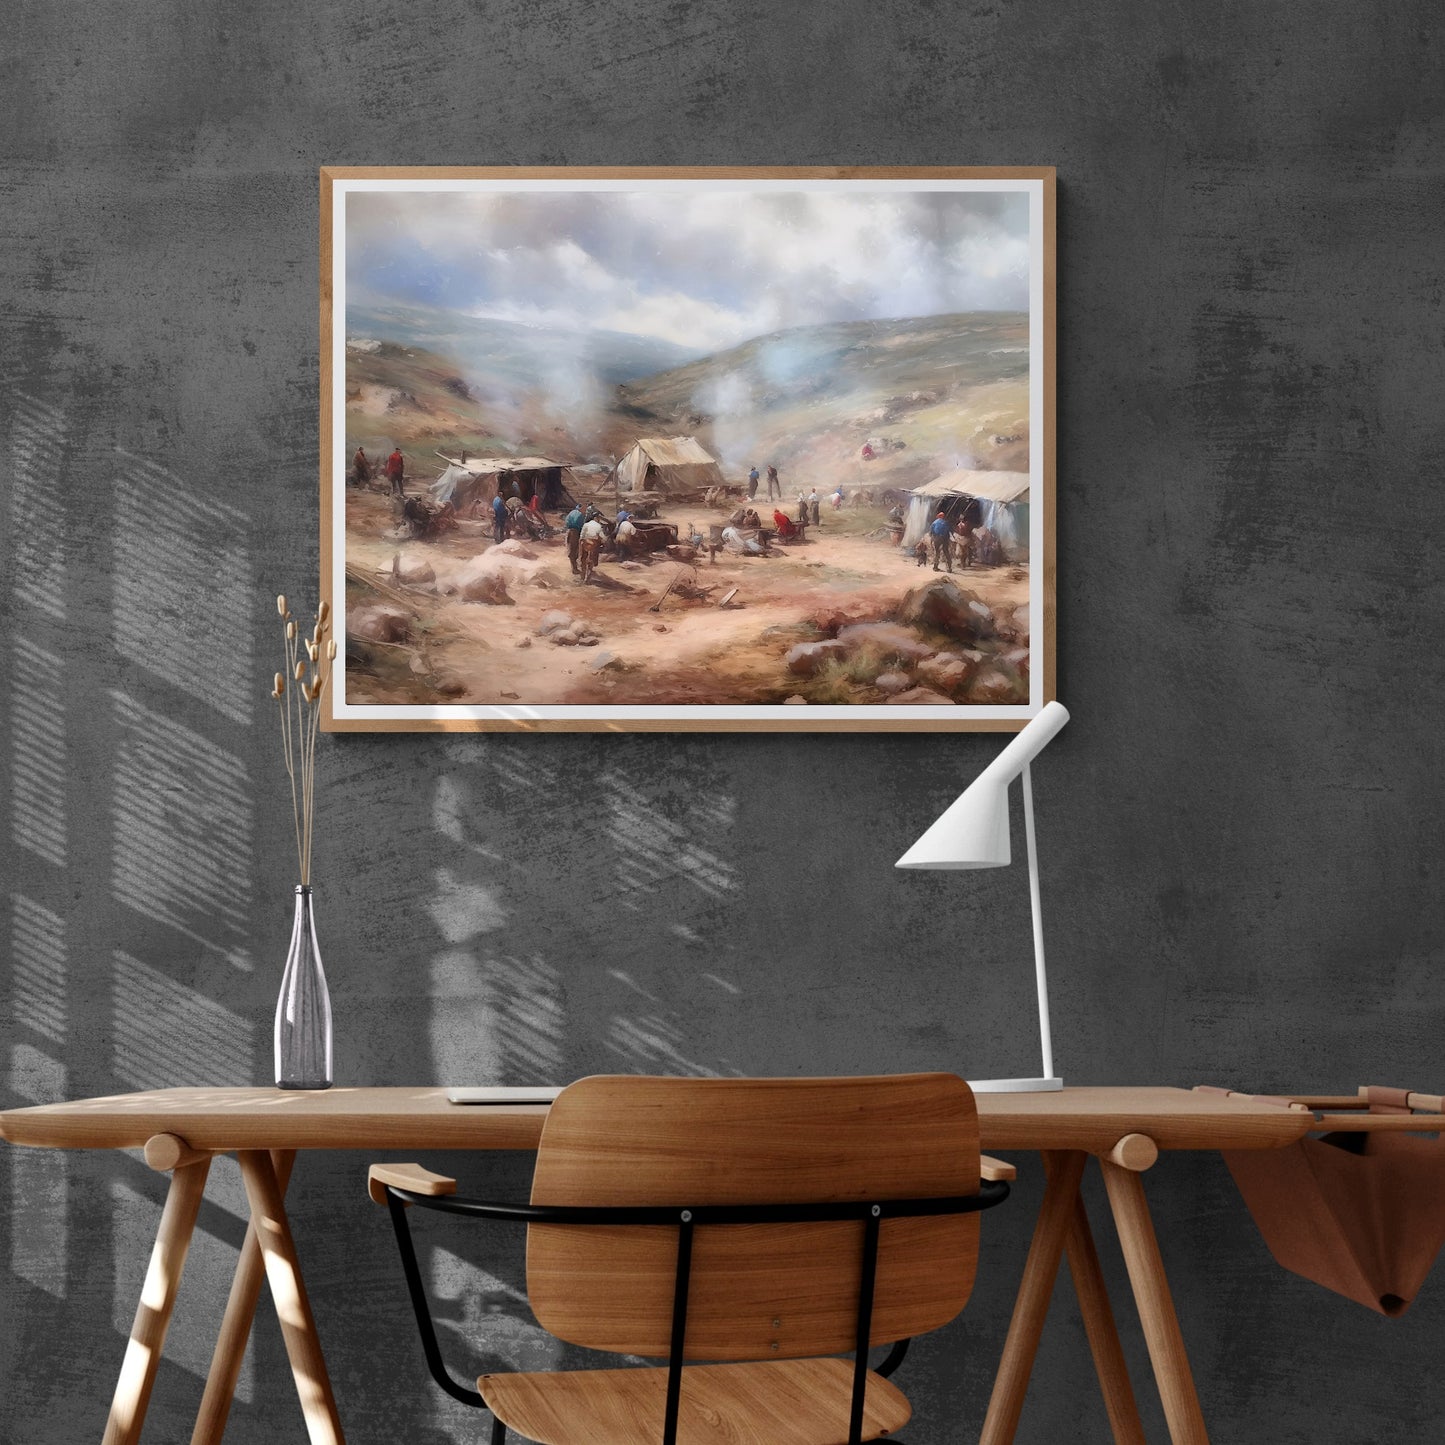 Vintage Wild West Paper Poster Prints Wall Art Small Settler Camp in the Frontier, Pioneer days, Soft Pale Colors, Wild West Art